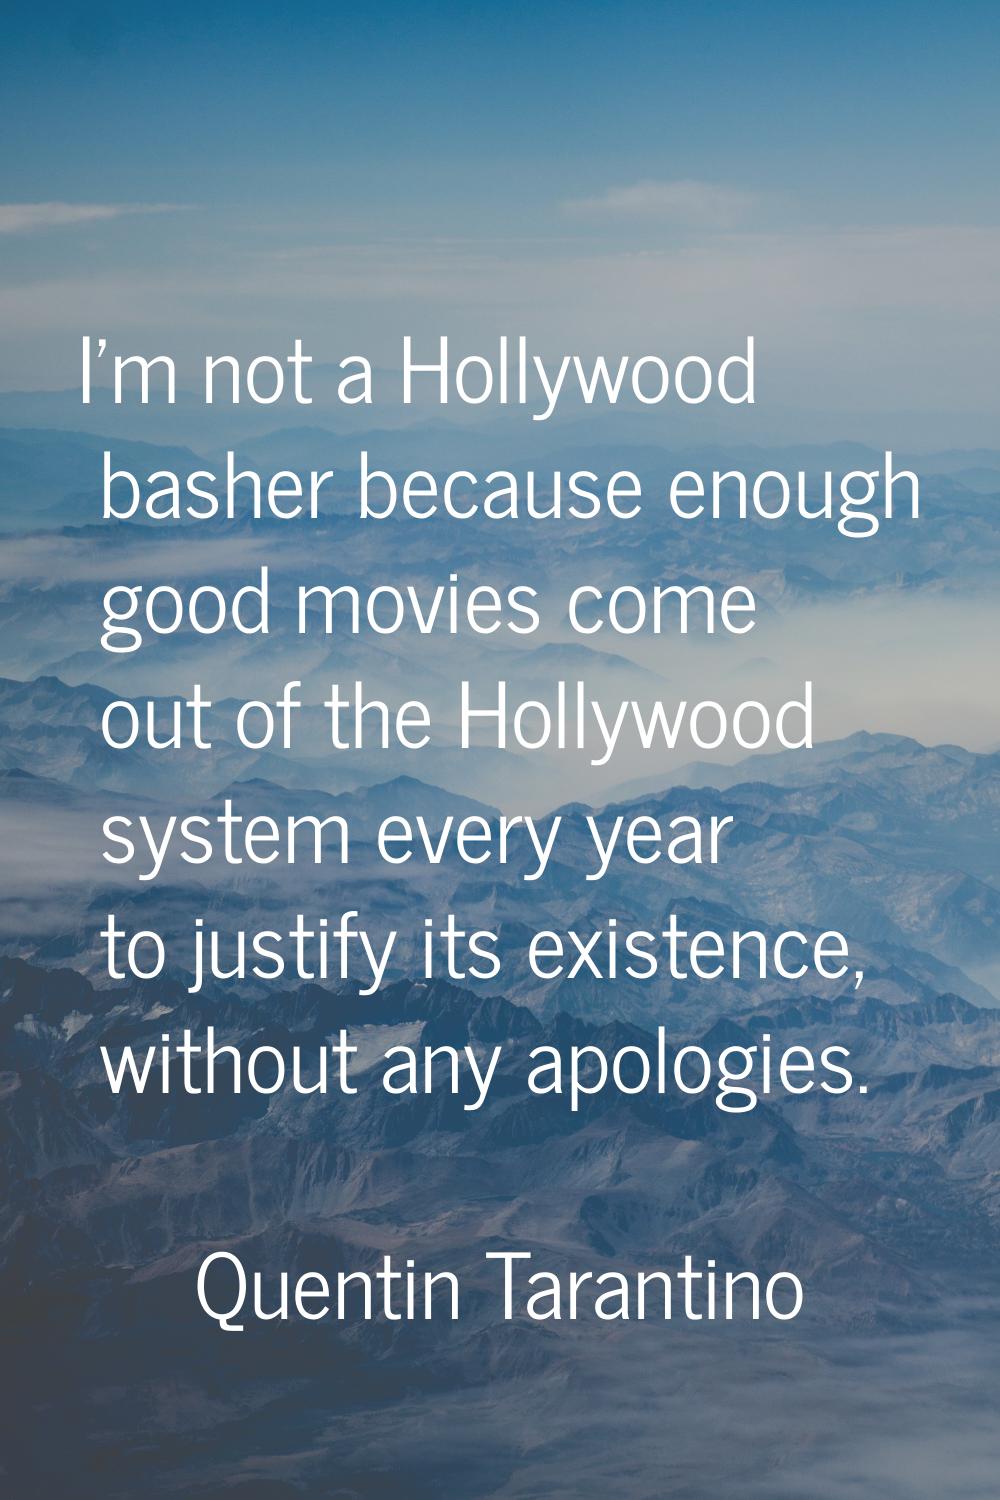 I'm not a Hollywood basher because enough good movies come out of the Hollywood system every year t